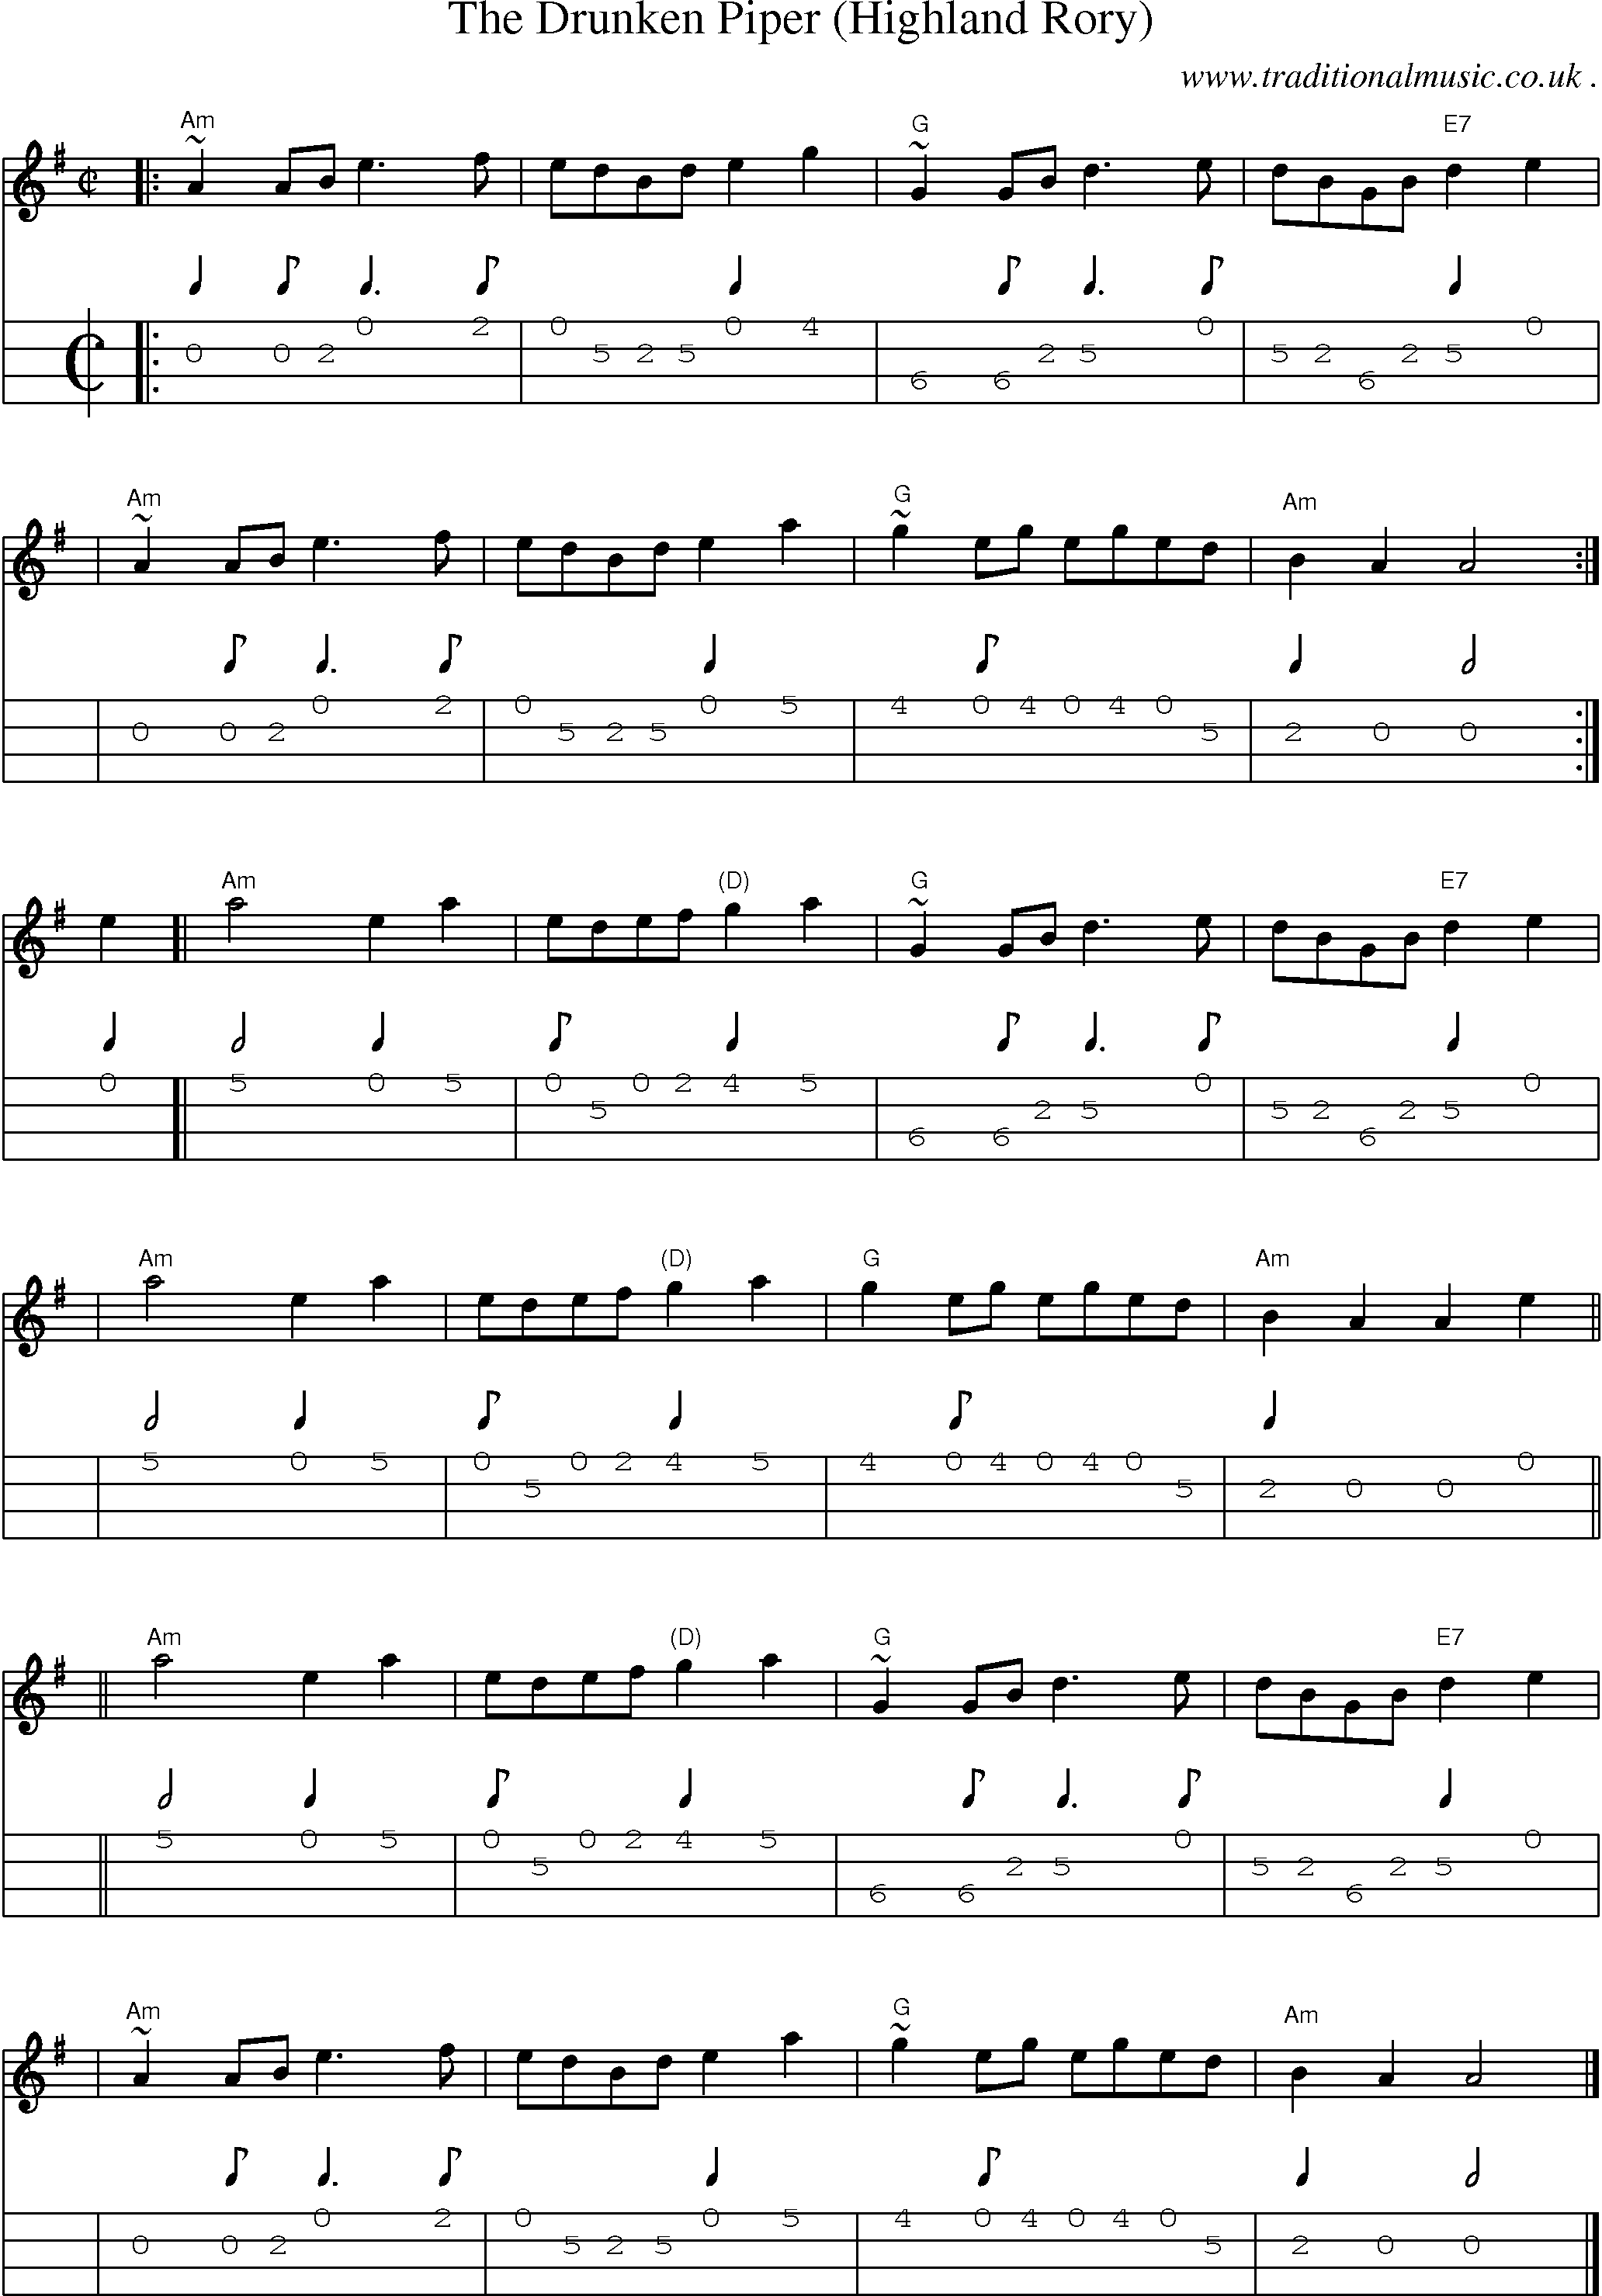 Sheet-music  score, Chords and Mandolin Tabs for The Drunken Piper Highland Rory